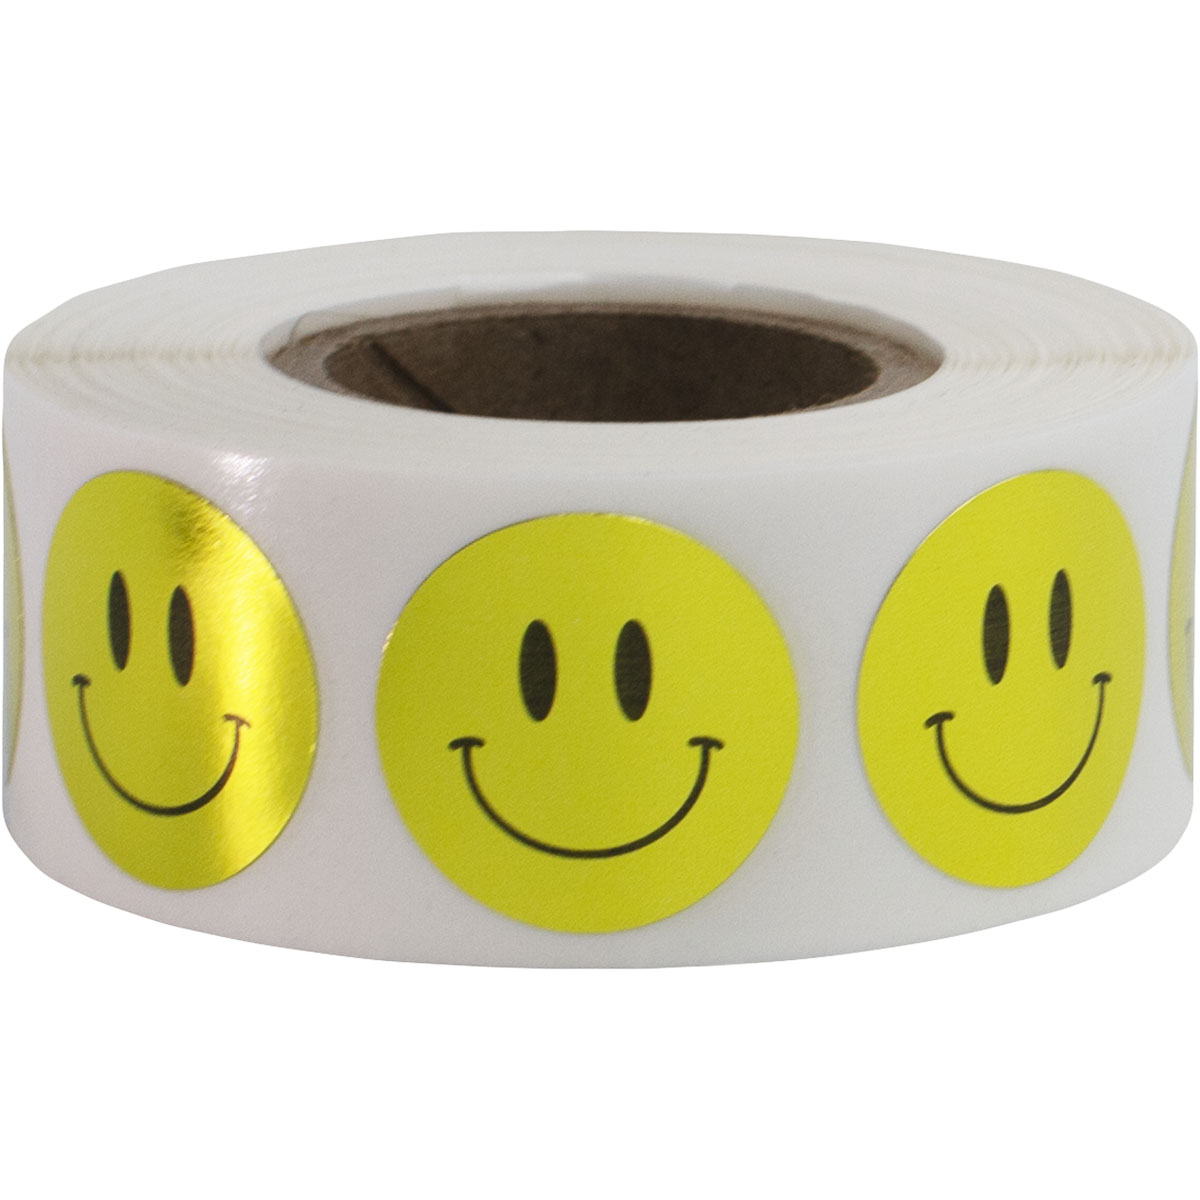 Metallic Gold Smiley Face Stickers 3/4